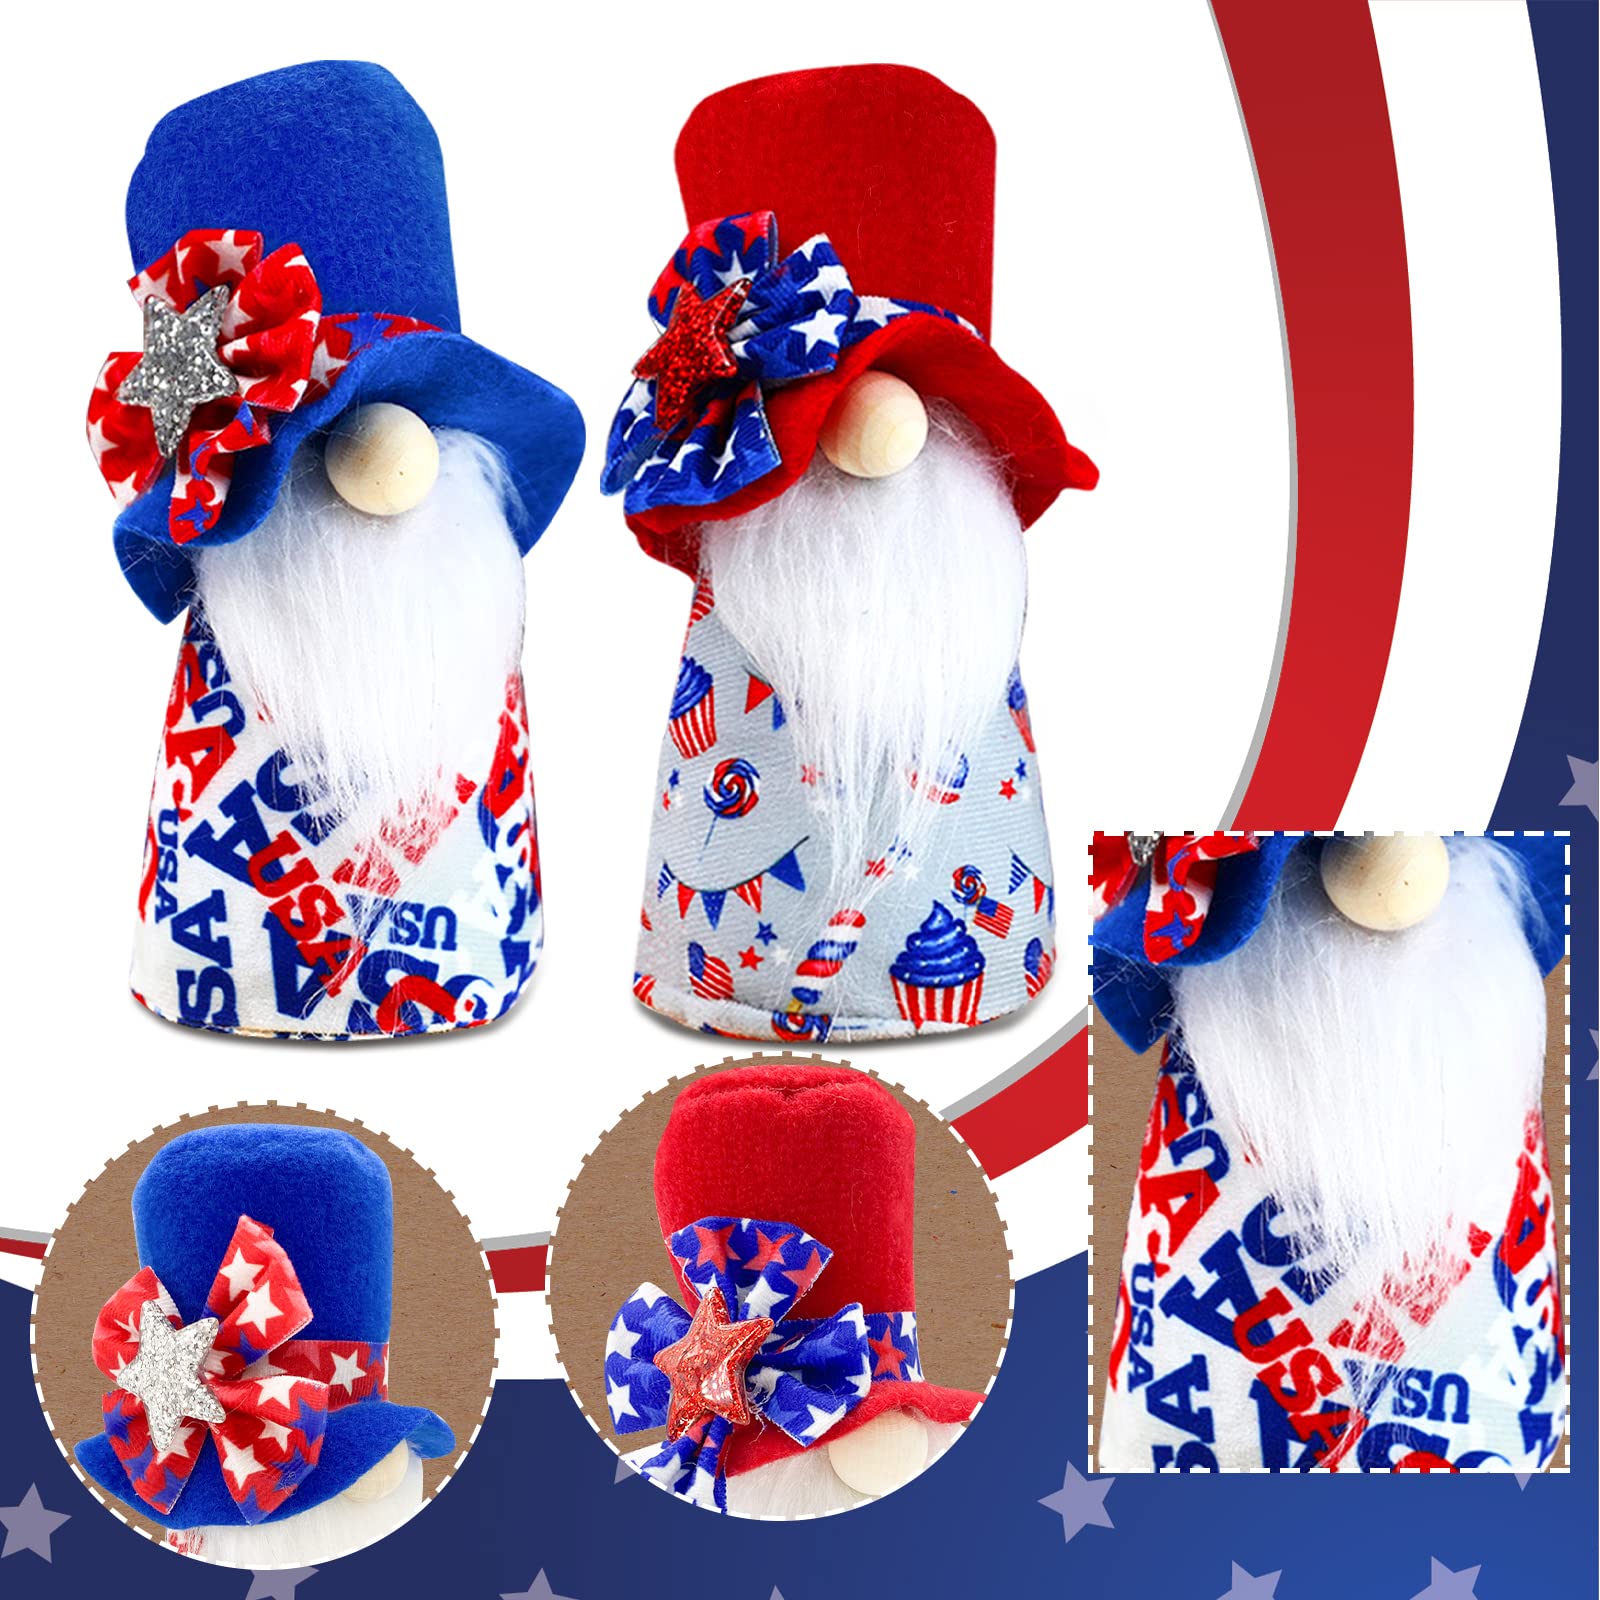 Lovinland Memorial Day Decorations, 4th of July Decorations, Fourth of July Decorations, Gnomes Gifts, Independence Day Patriotic Gnomes Decorations for Home Party Indoor Table Decor